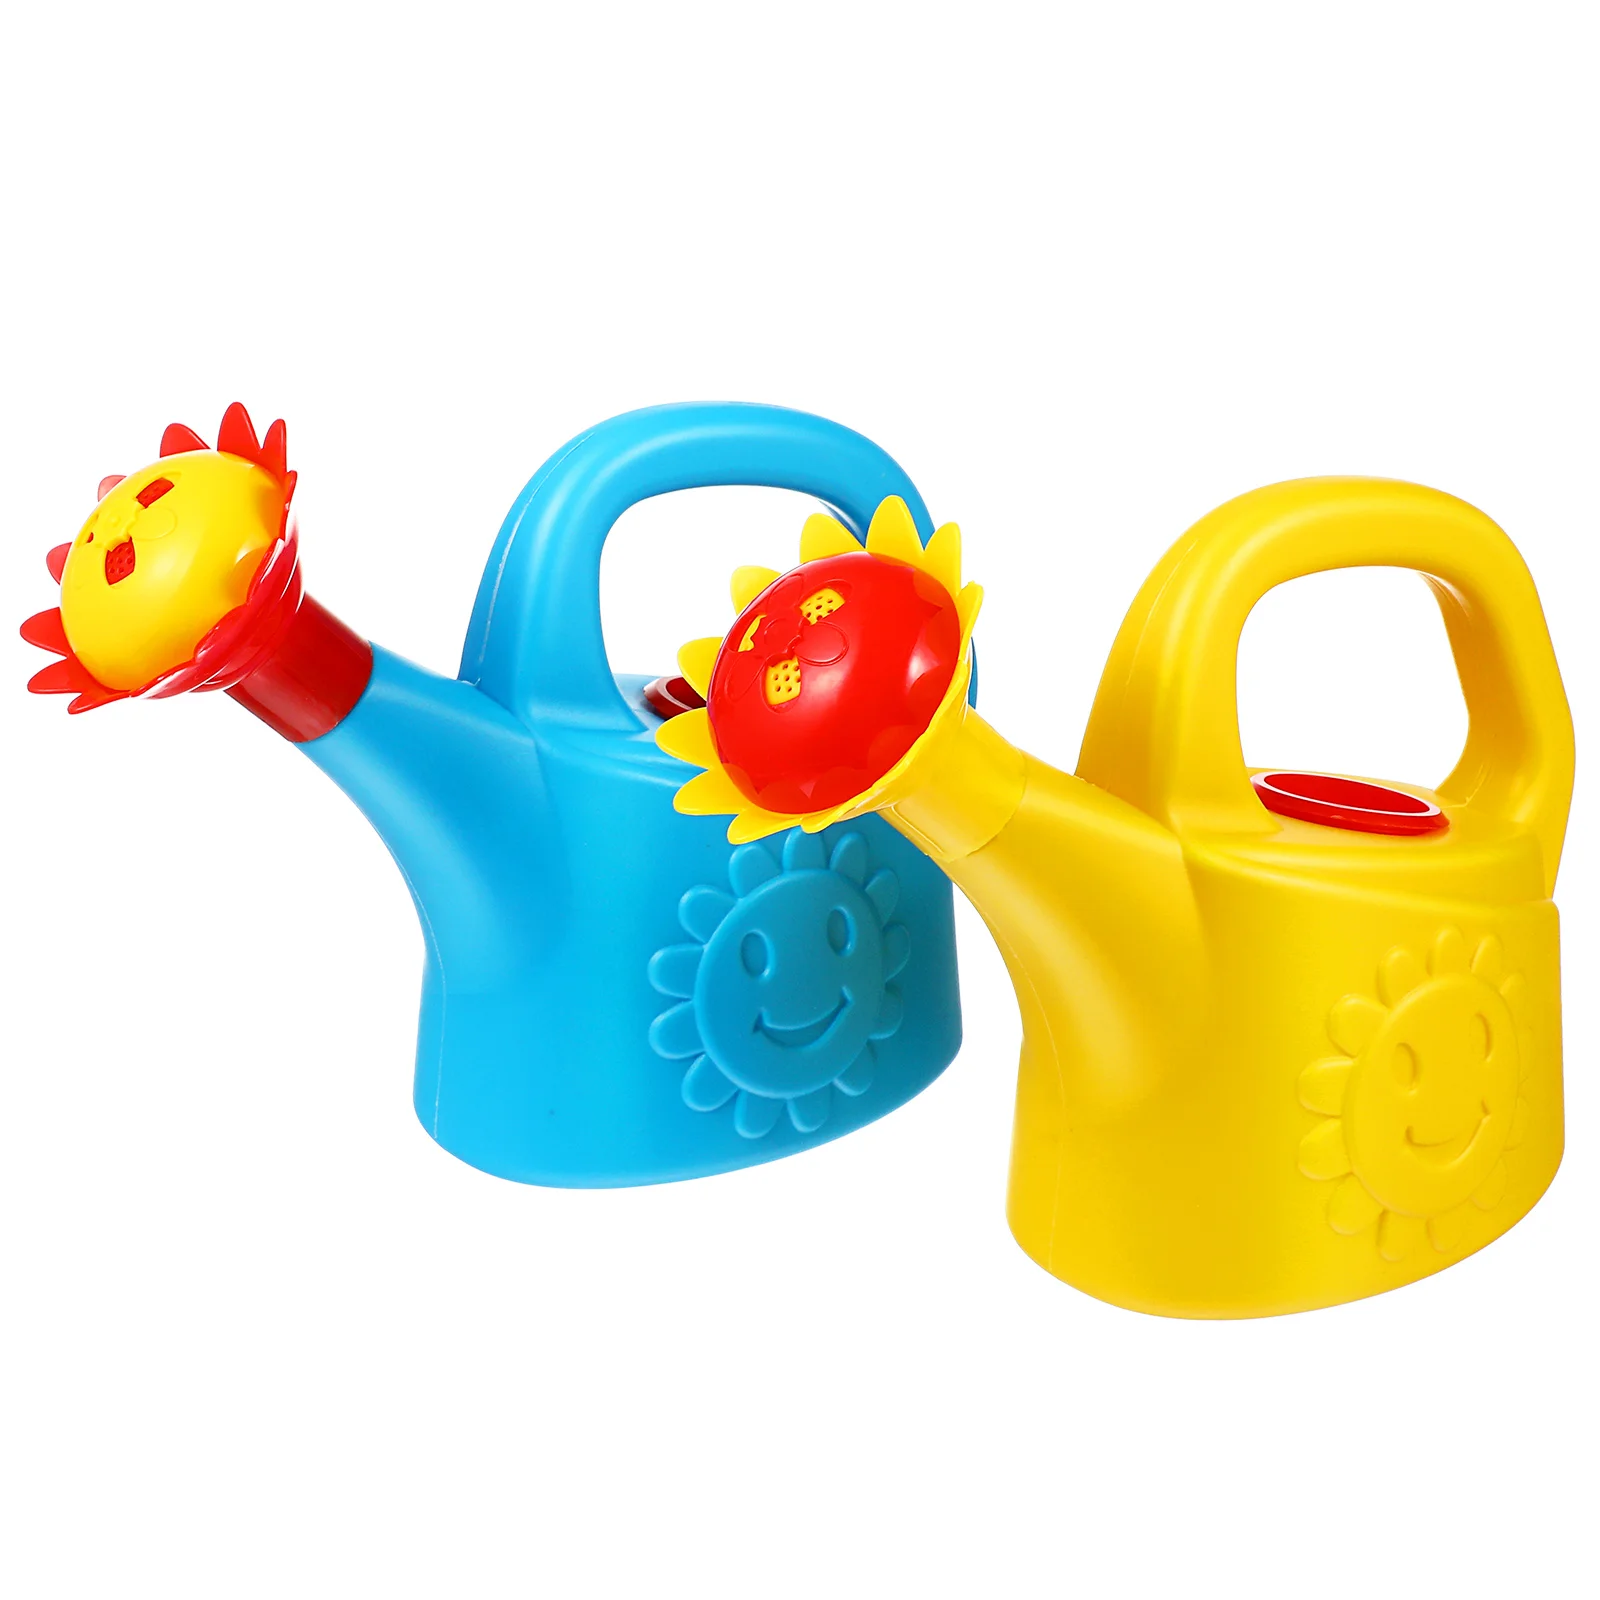 

watering can toys, watering can watering pot chicken bath for cartoon early educational for home garden outdoor activities